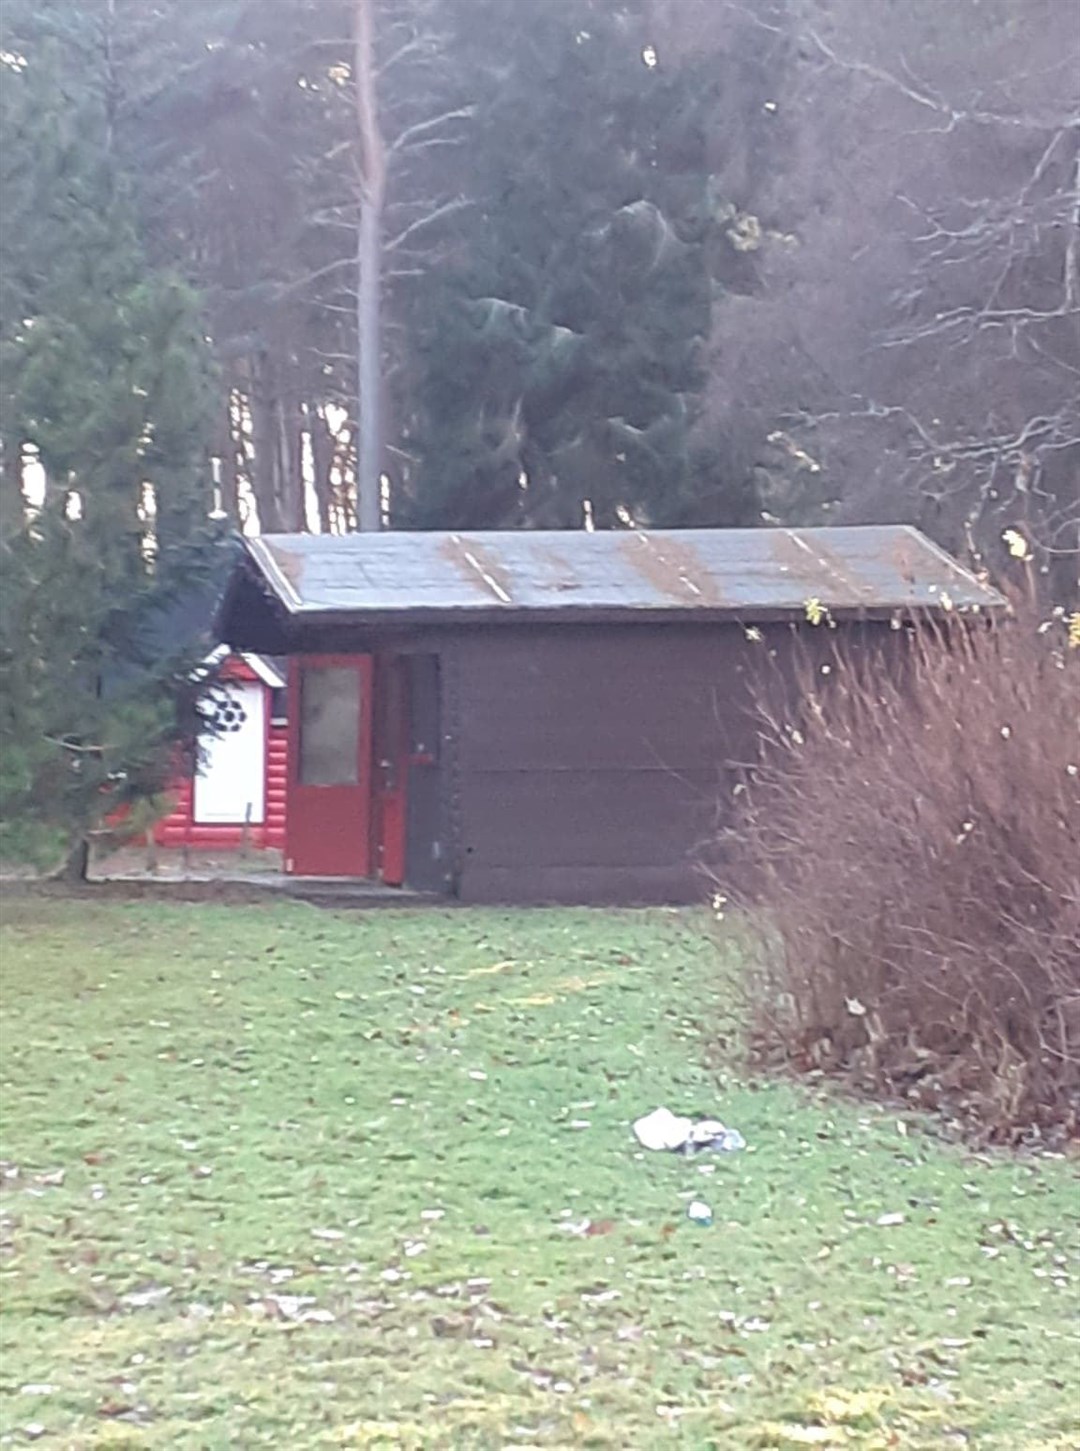 It's been all quiet at Santa's Grotto on the Aviemore resort since the cases were confirmed yesterday